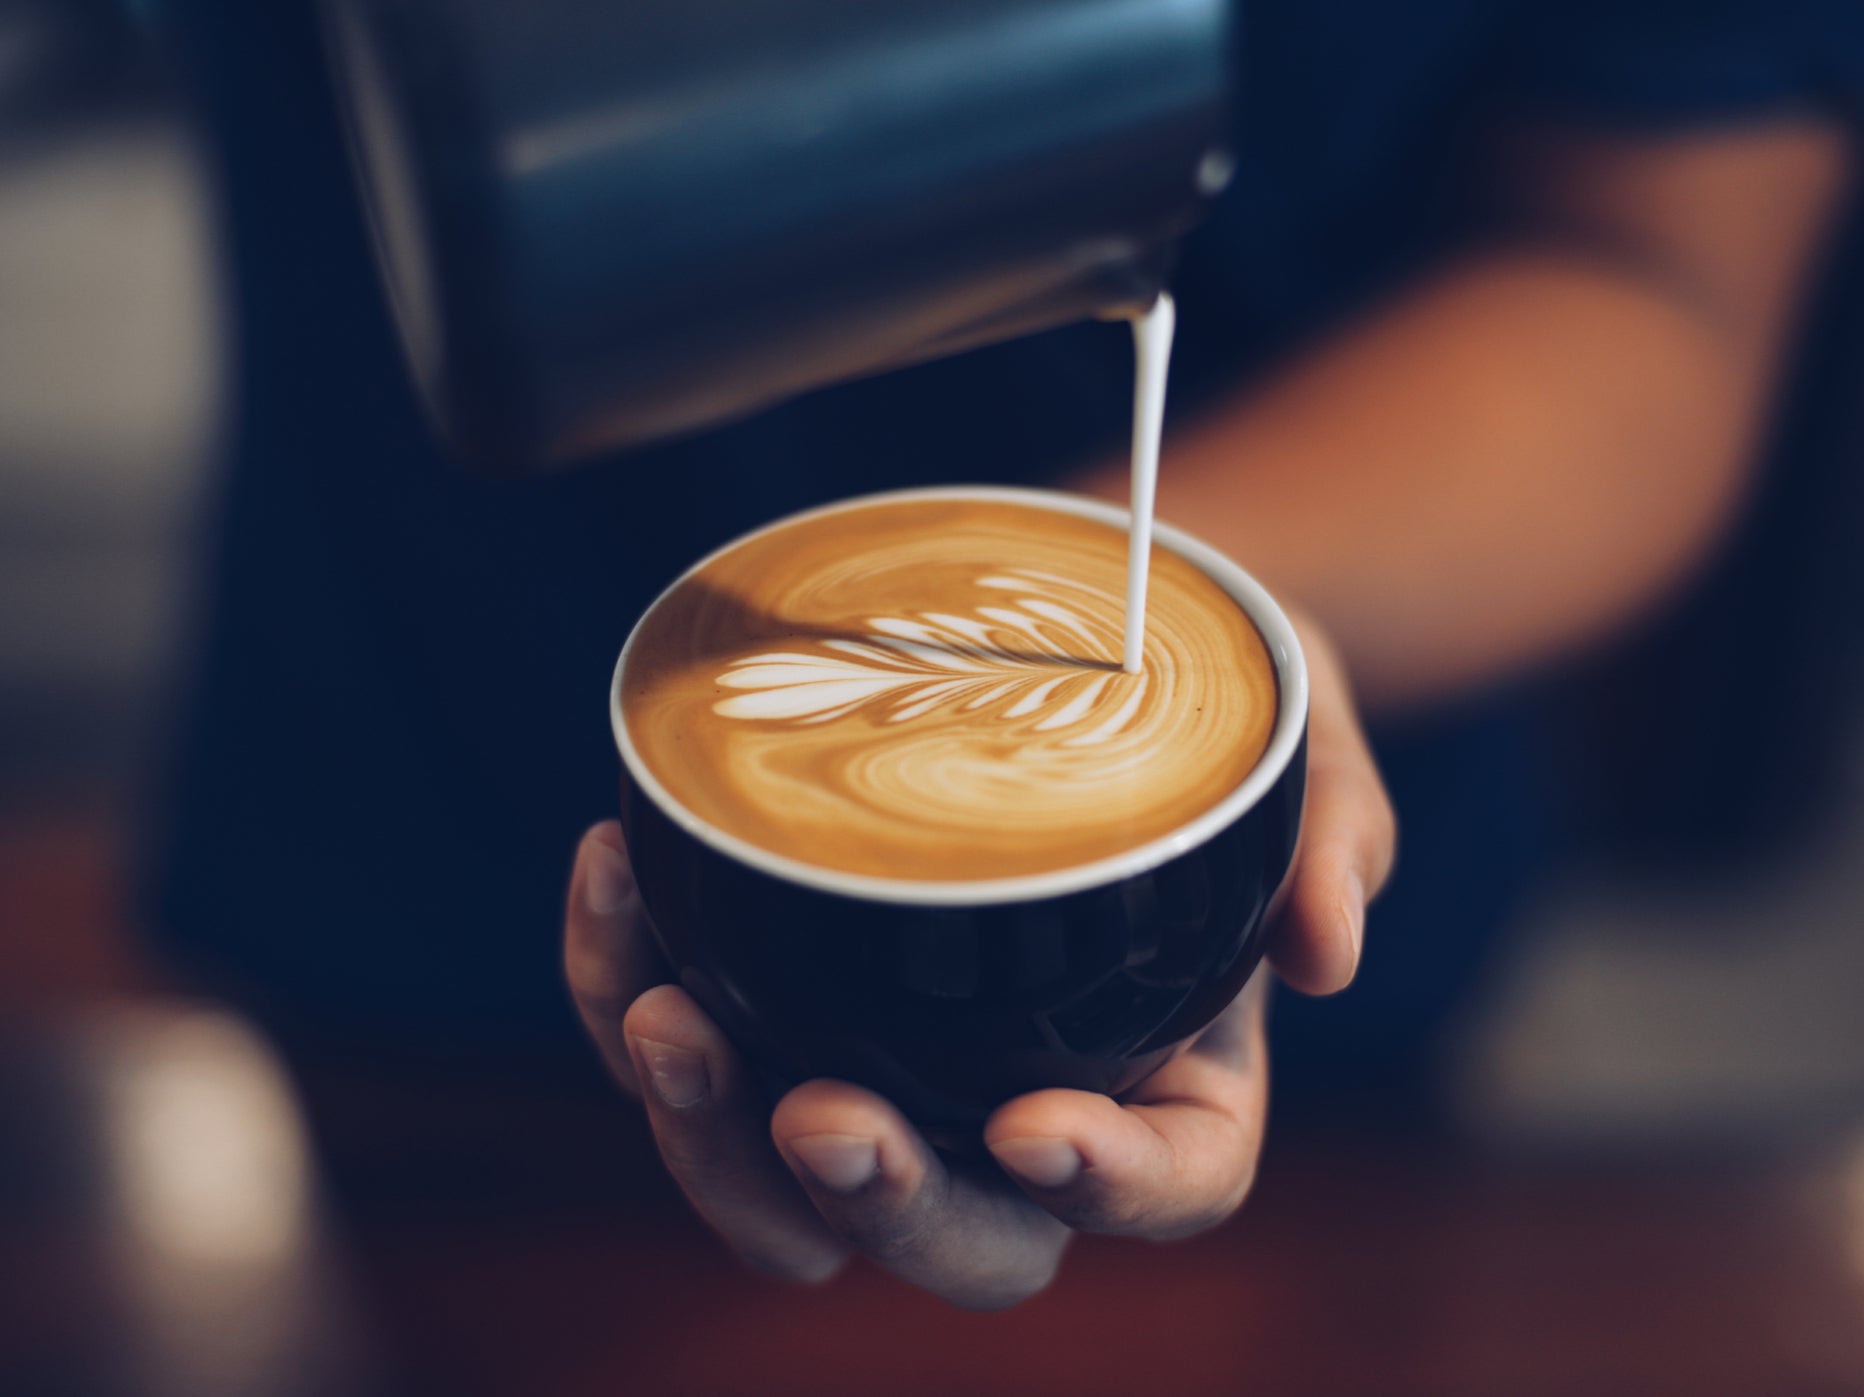 A person holds a latte